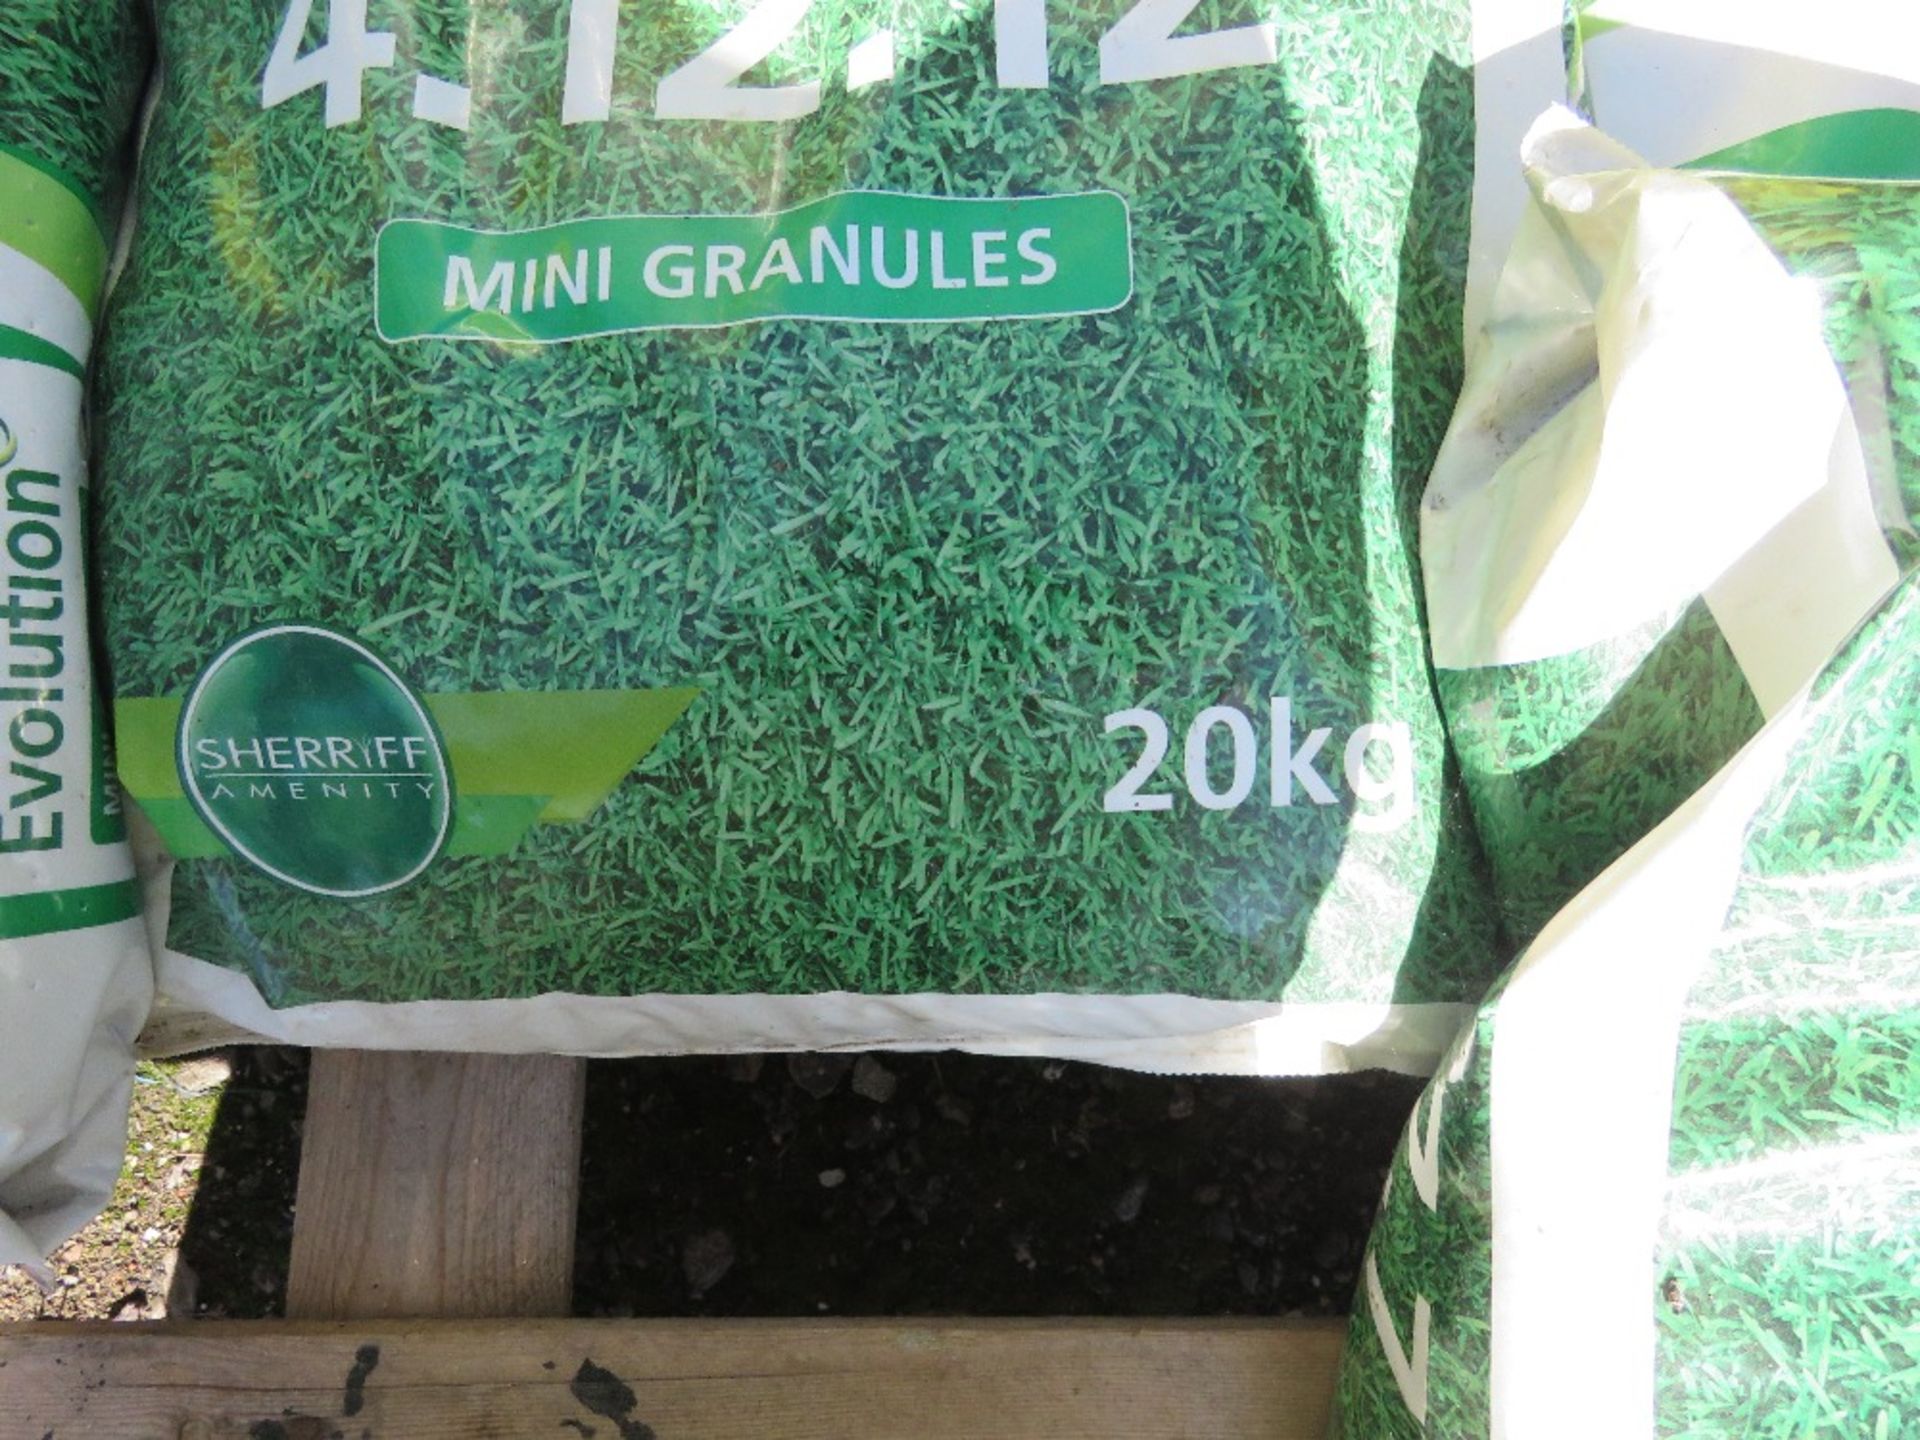 5NO BAGS OF 9.7.7 FERTILISER. DIRECT FROM LOCAL LANDSCAPE COMPANY WHO ARE CLOSING A DEPOT. - Image 4 of 4